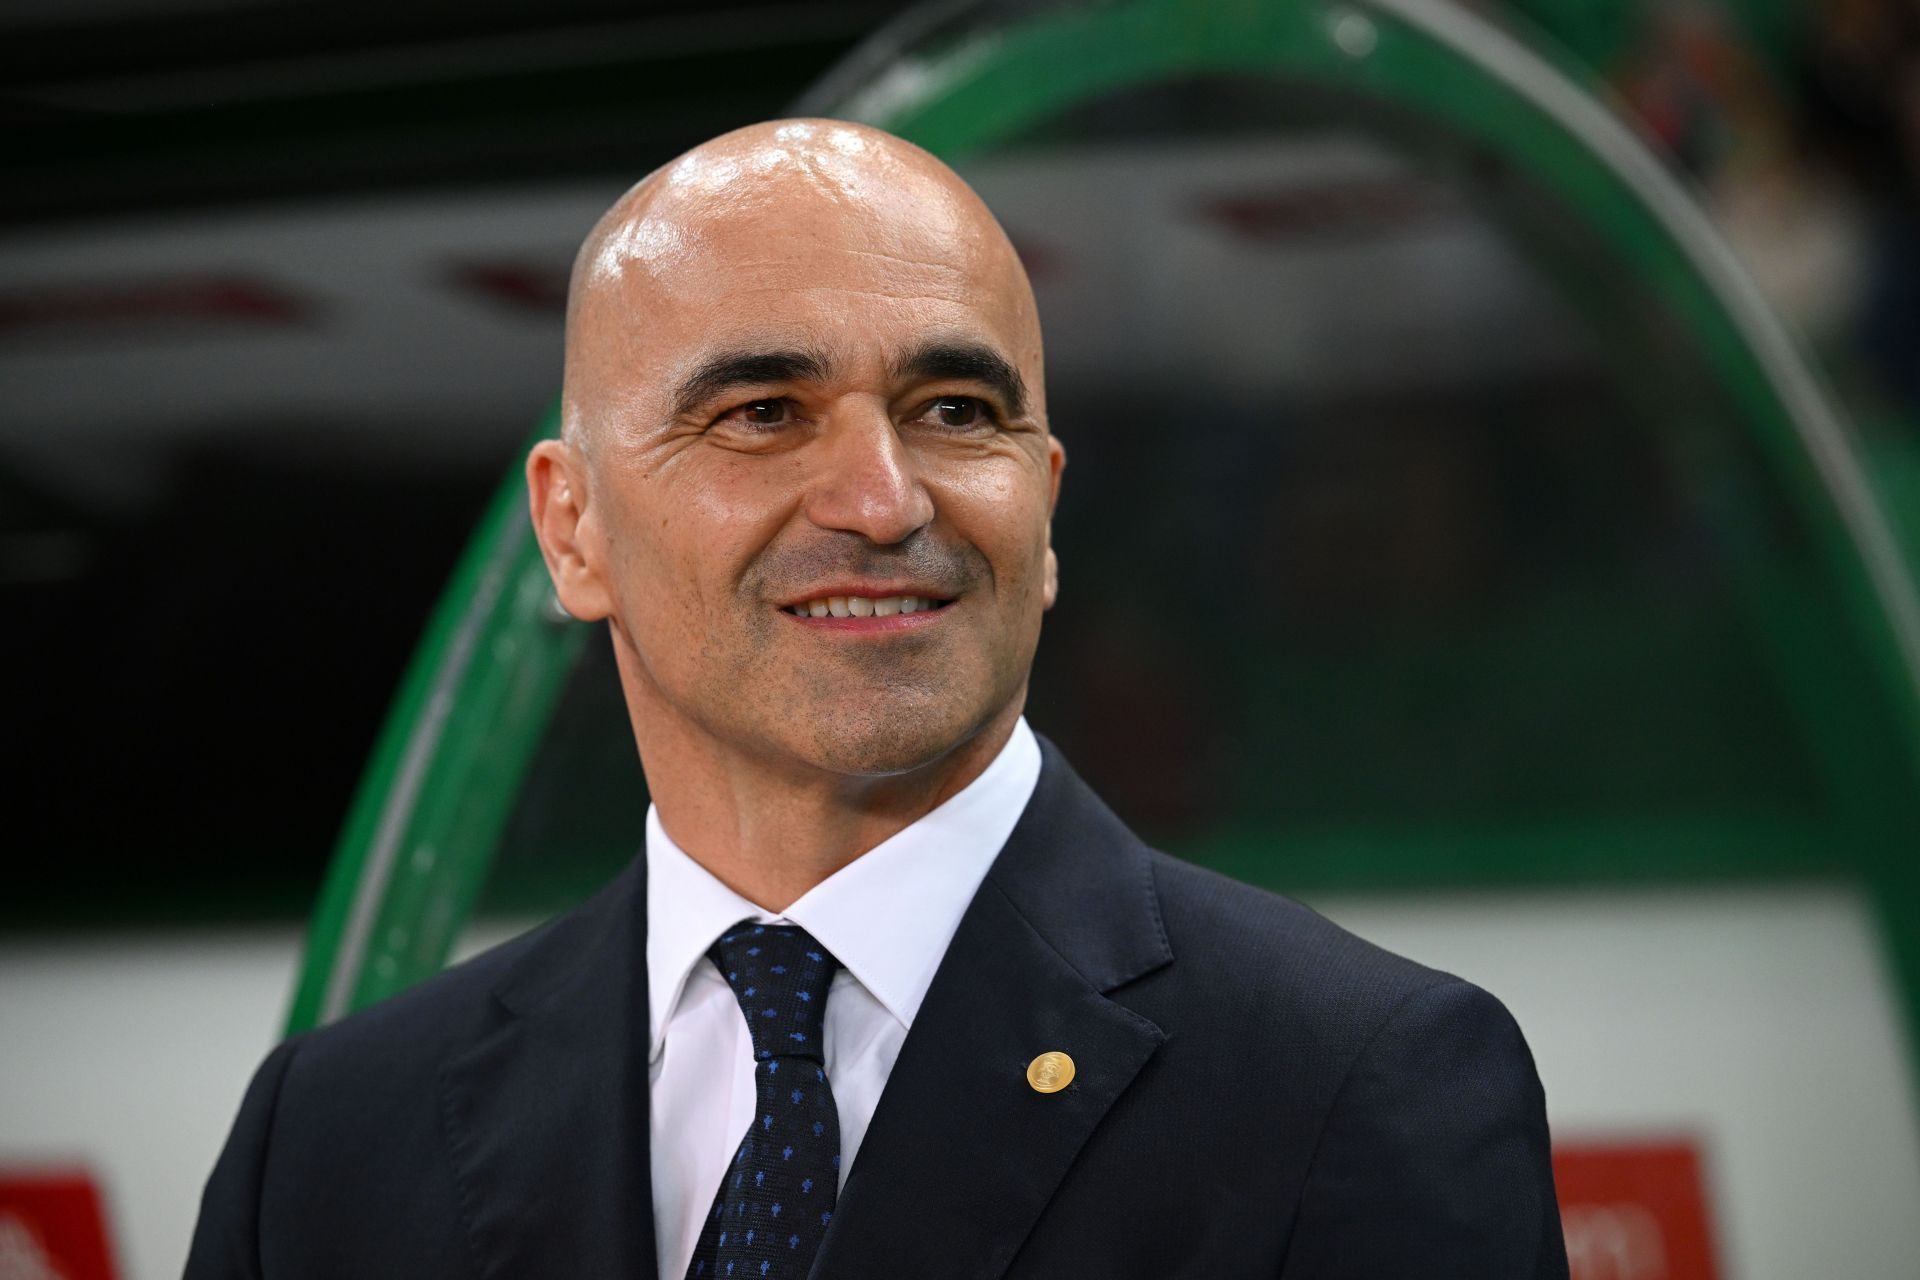 Roberto Martinez won his first match as Portugal manager, having been sacked by Belgium last year